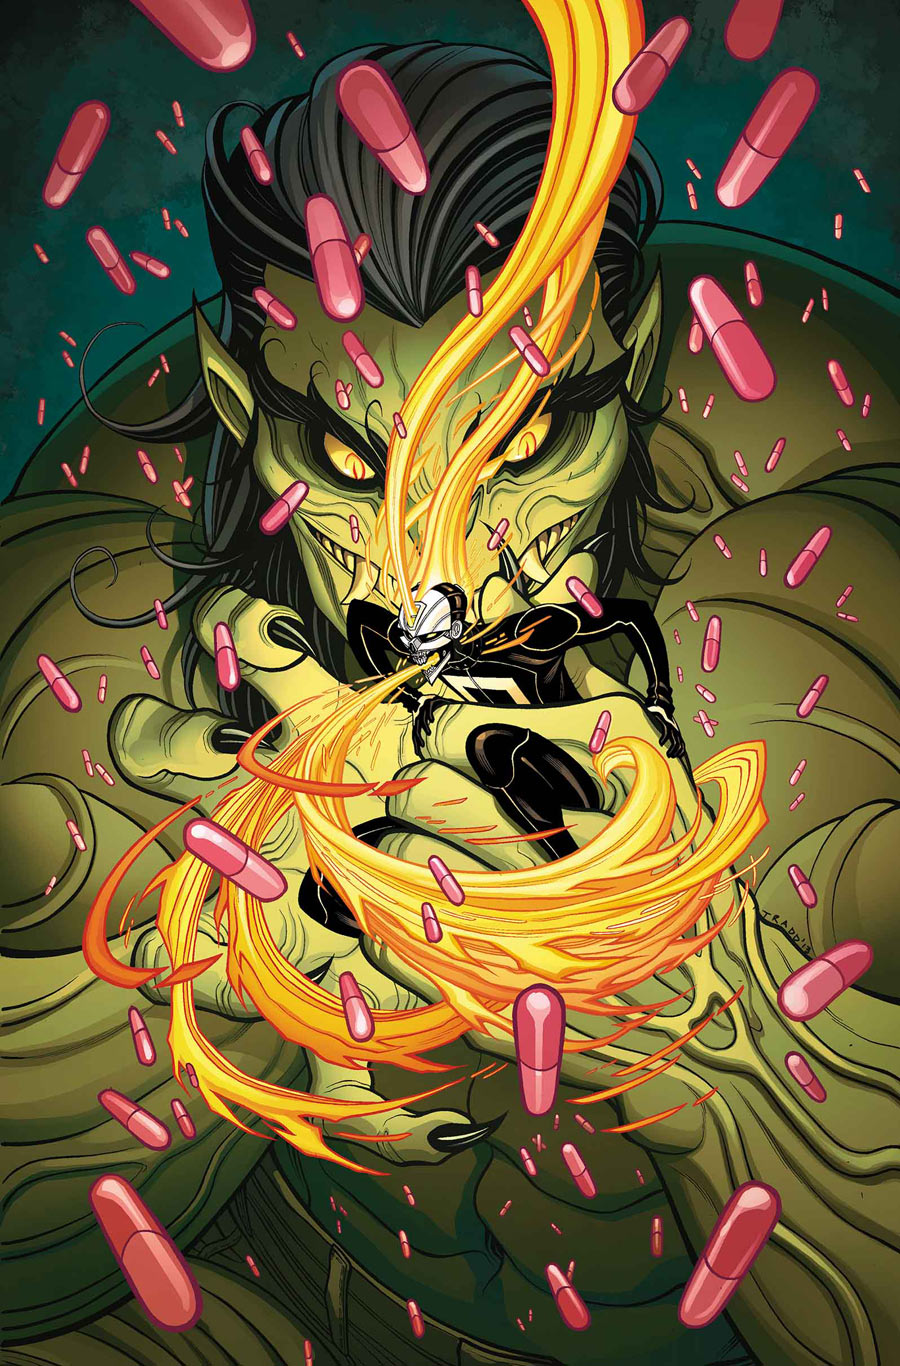 ALL-NEW GHOST RIDER #3